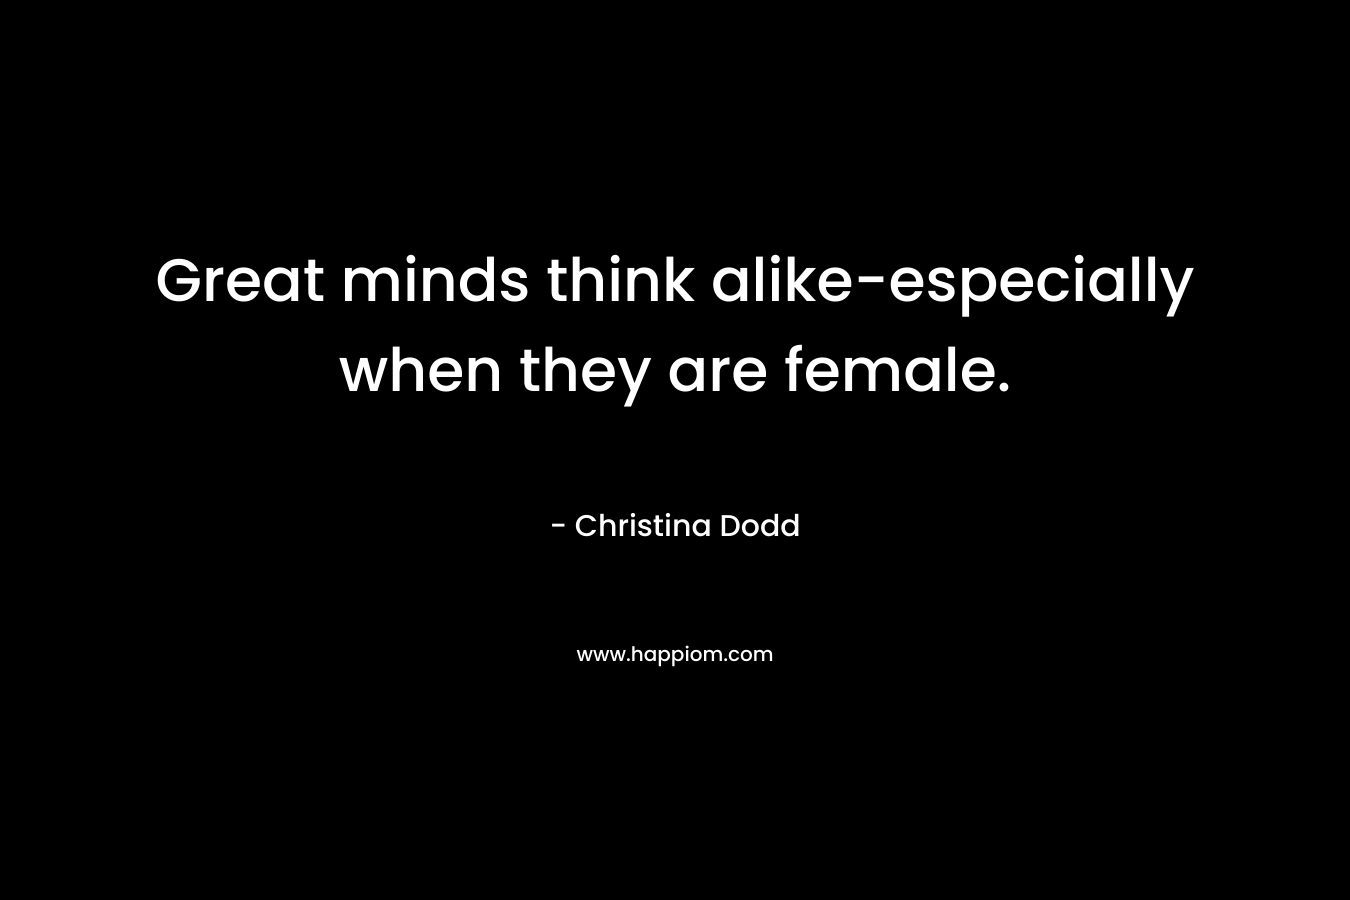 Great minds think alike-especially when they are female.